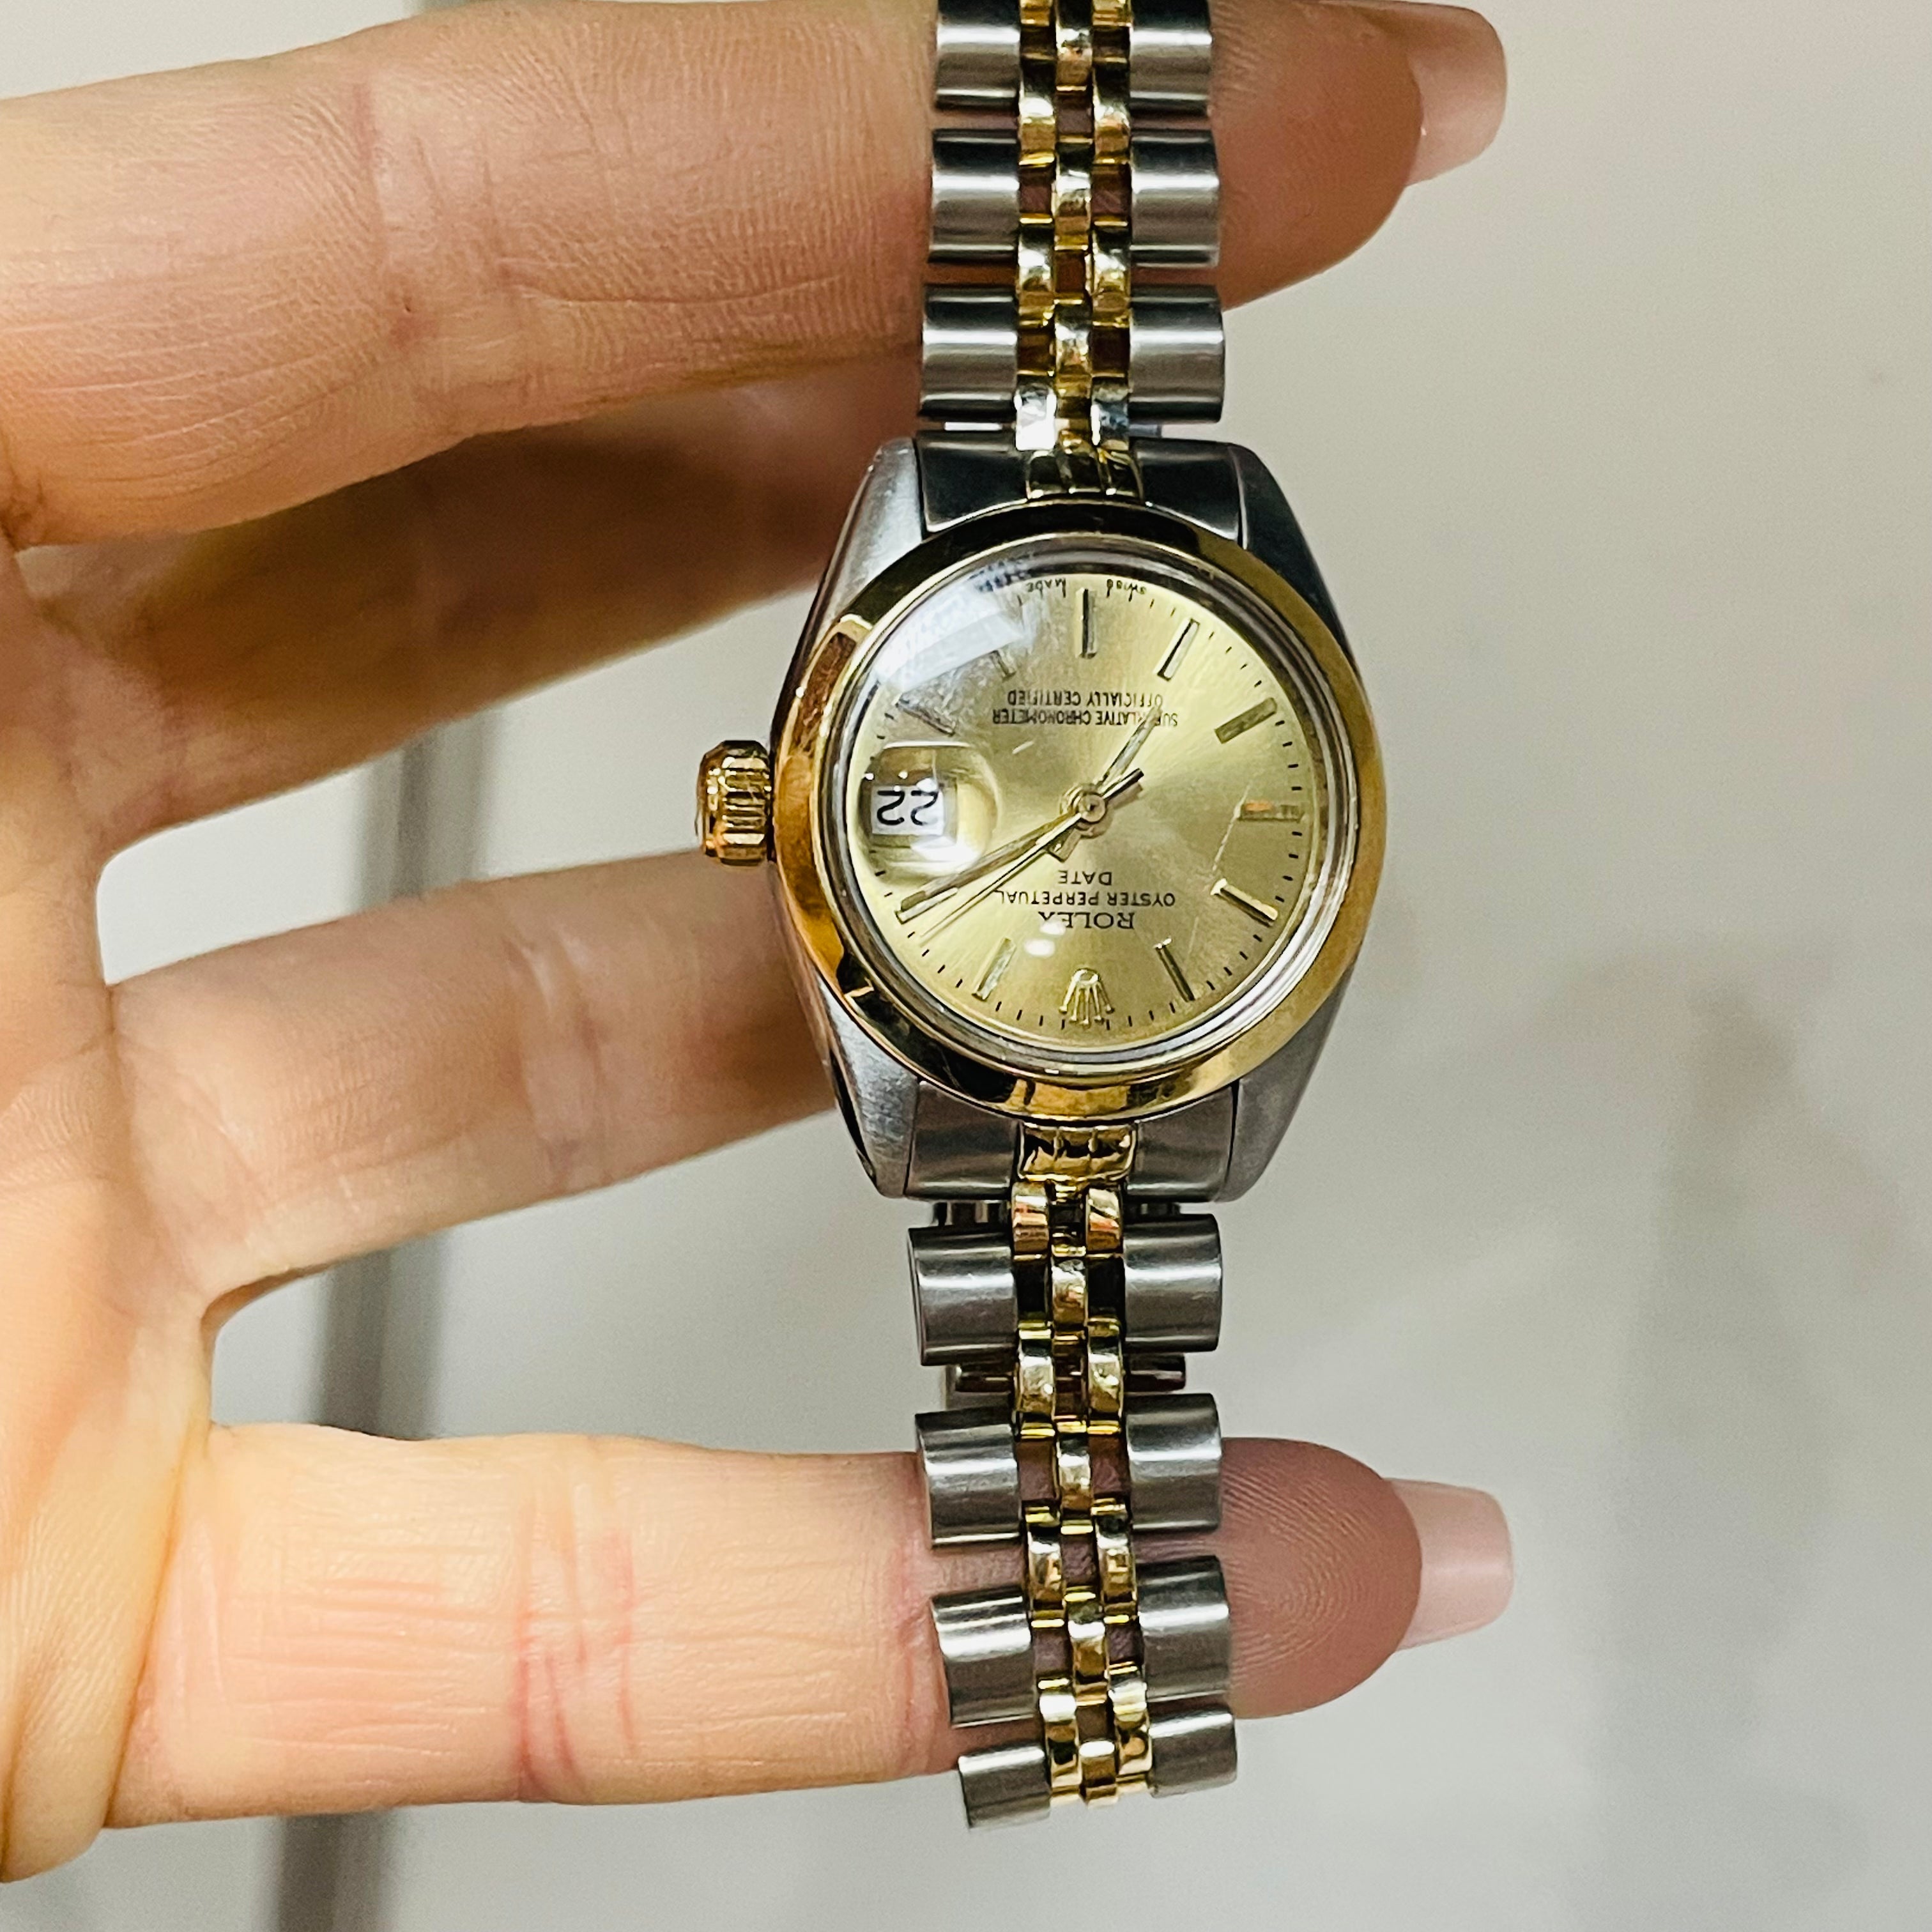 26mm Stainless Steel and Yellow Gold Ladies Rolex Watch